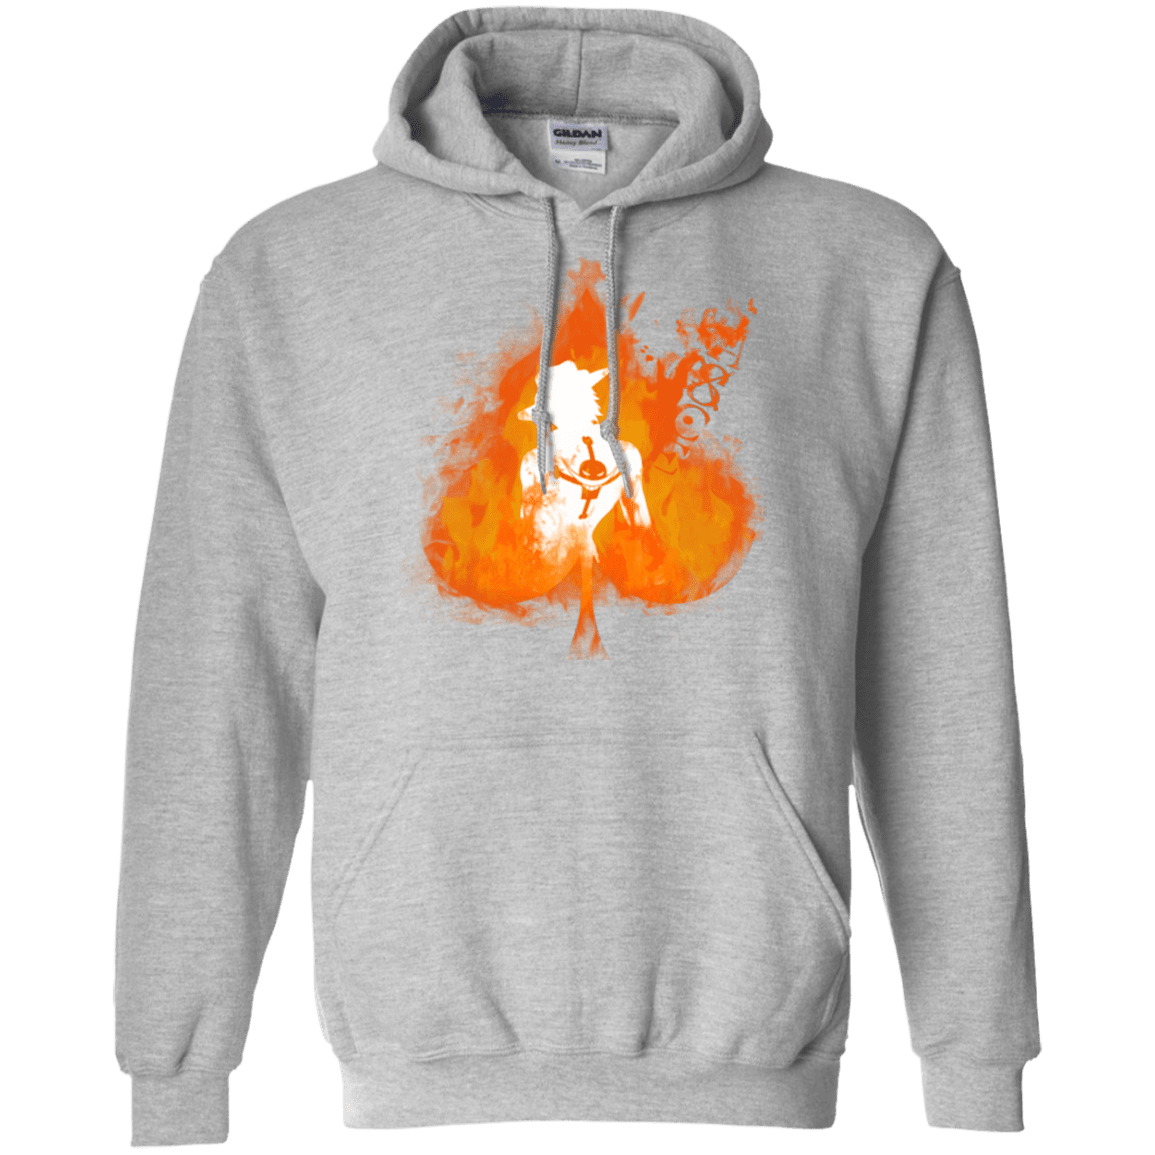 Sweatshirts Sport Grey / Small Ace one piece Pullover Hoodie